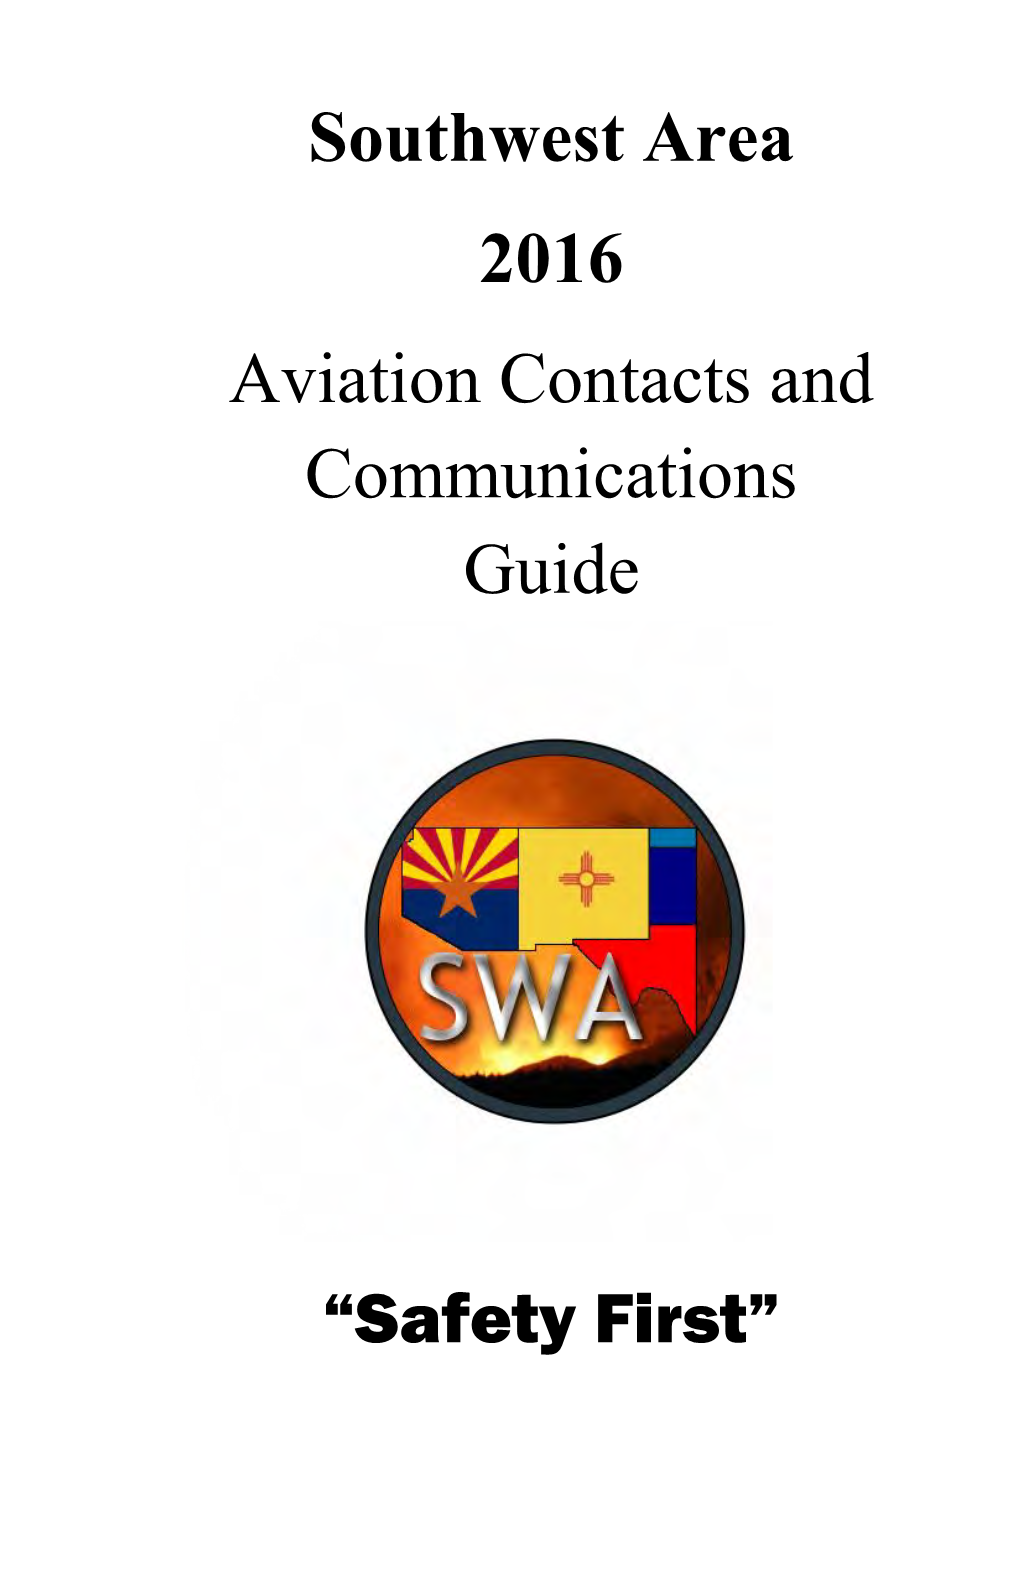 Southwest Area 2016 Aviation Contacts and Communications Guide